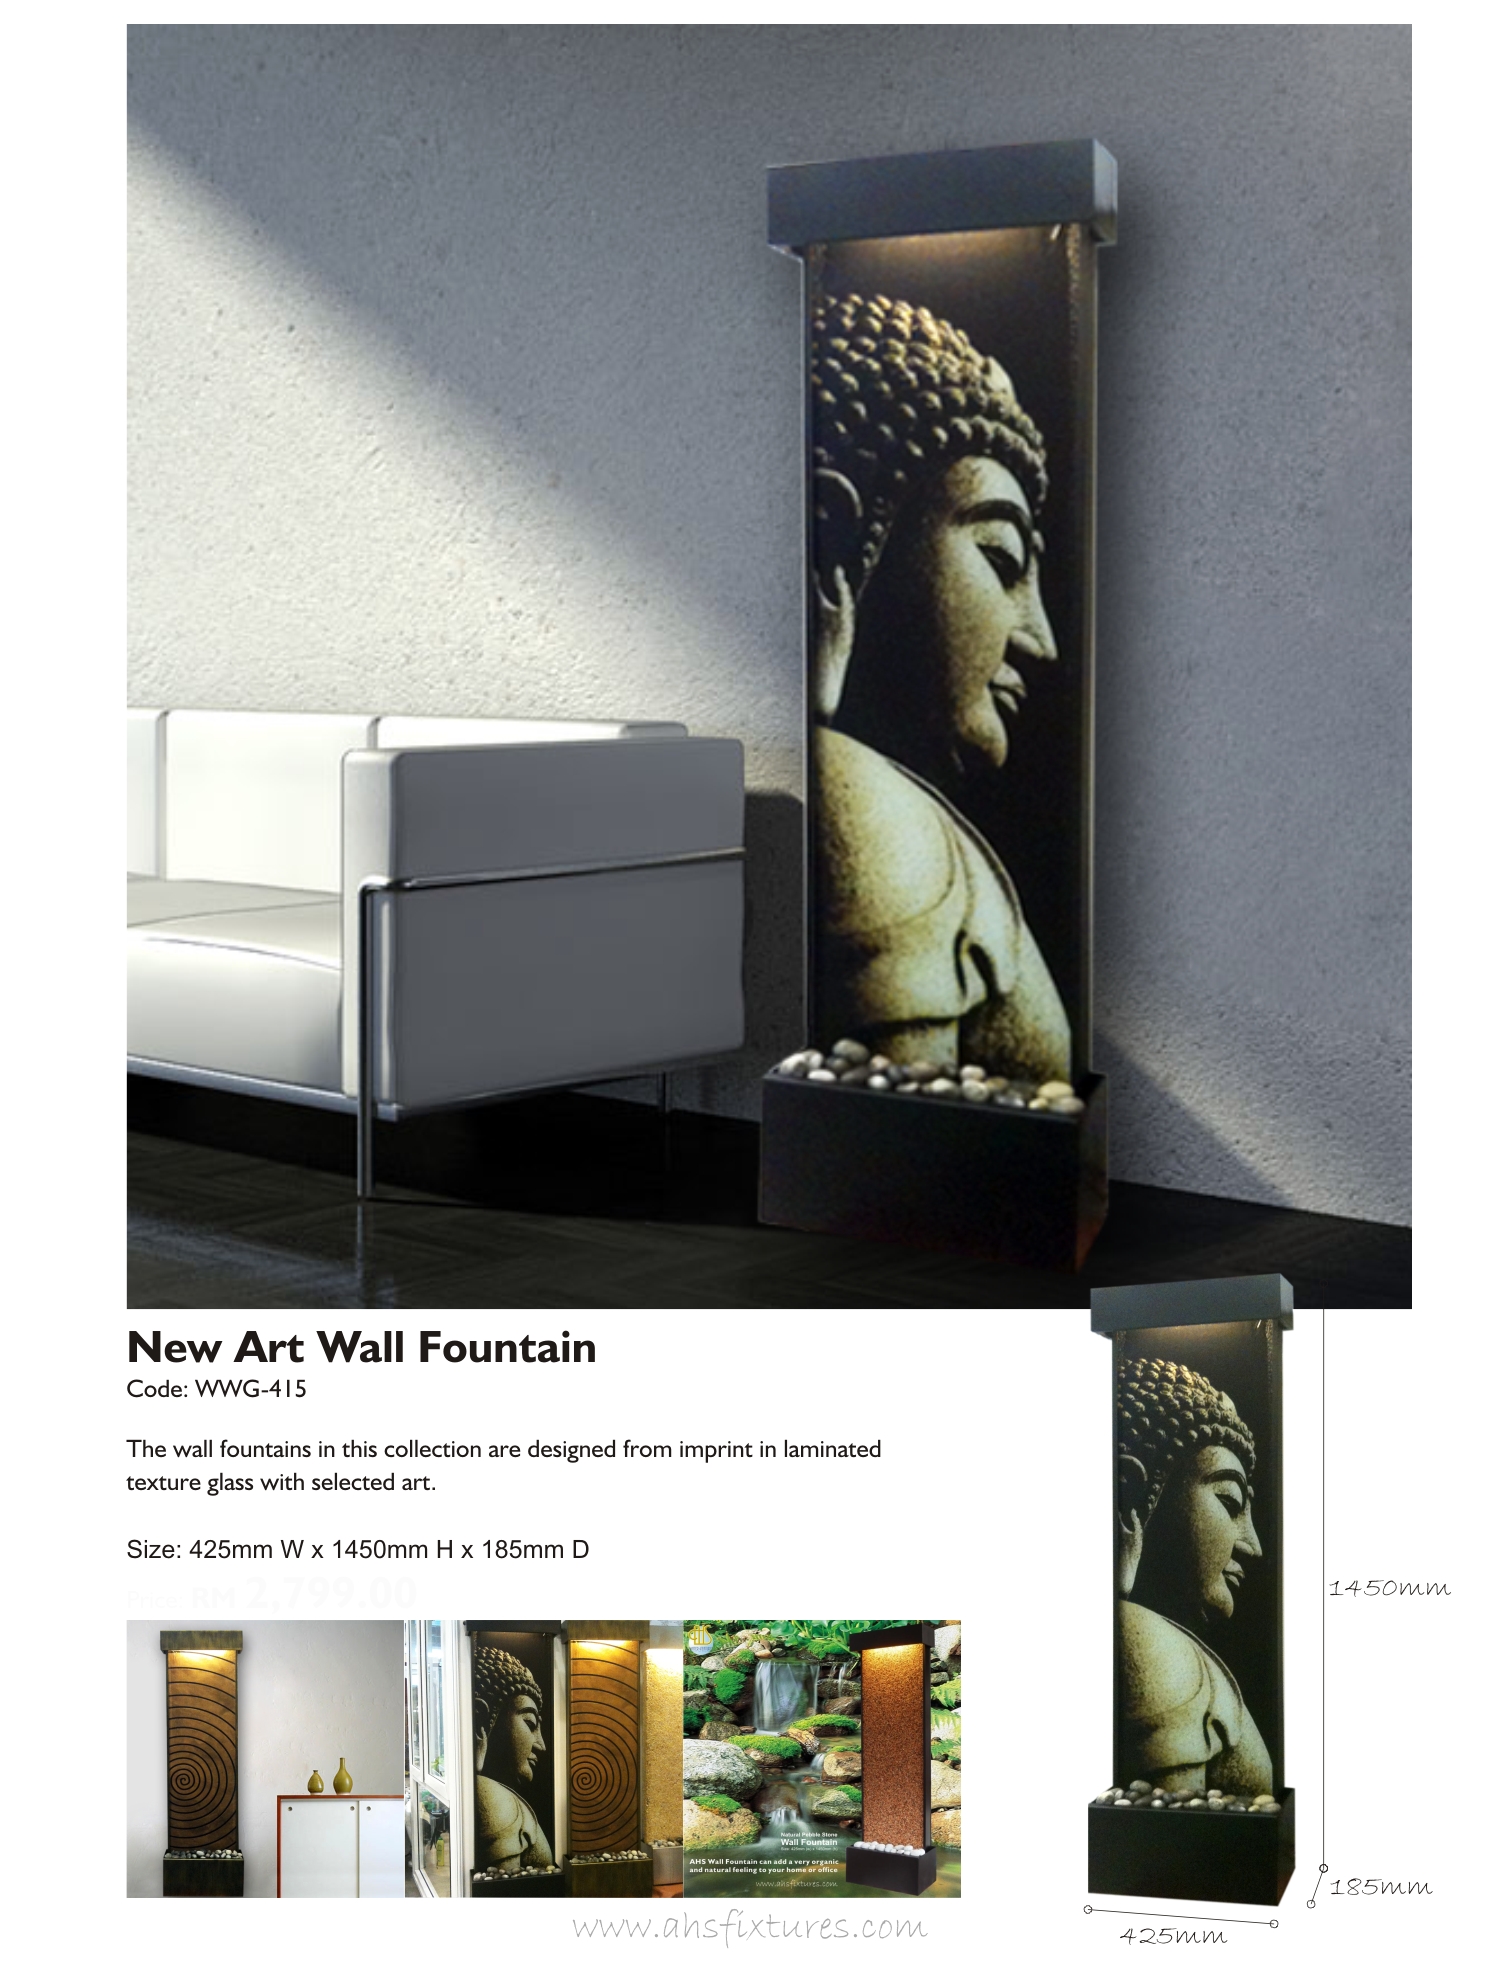 WWG-415 New Art Wall Fountains Water Features Indoor Waterfall Made In Malaysia